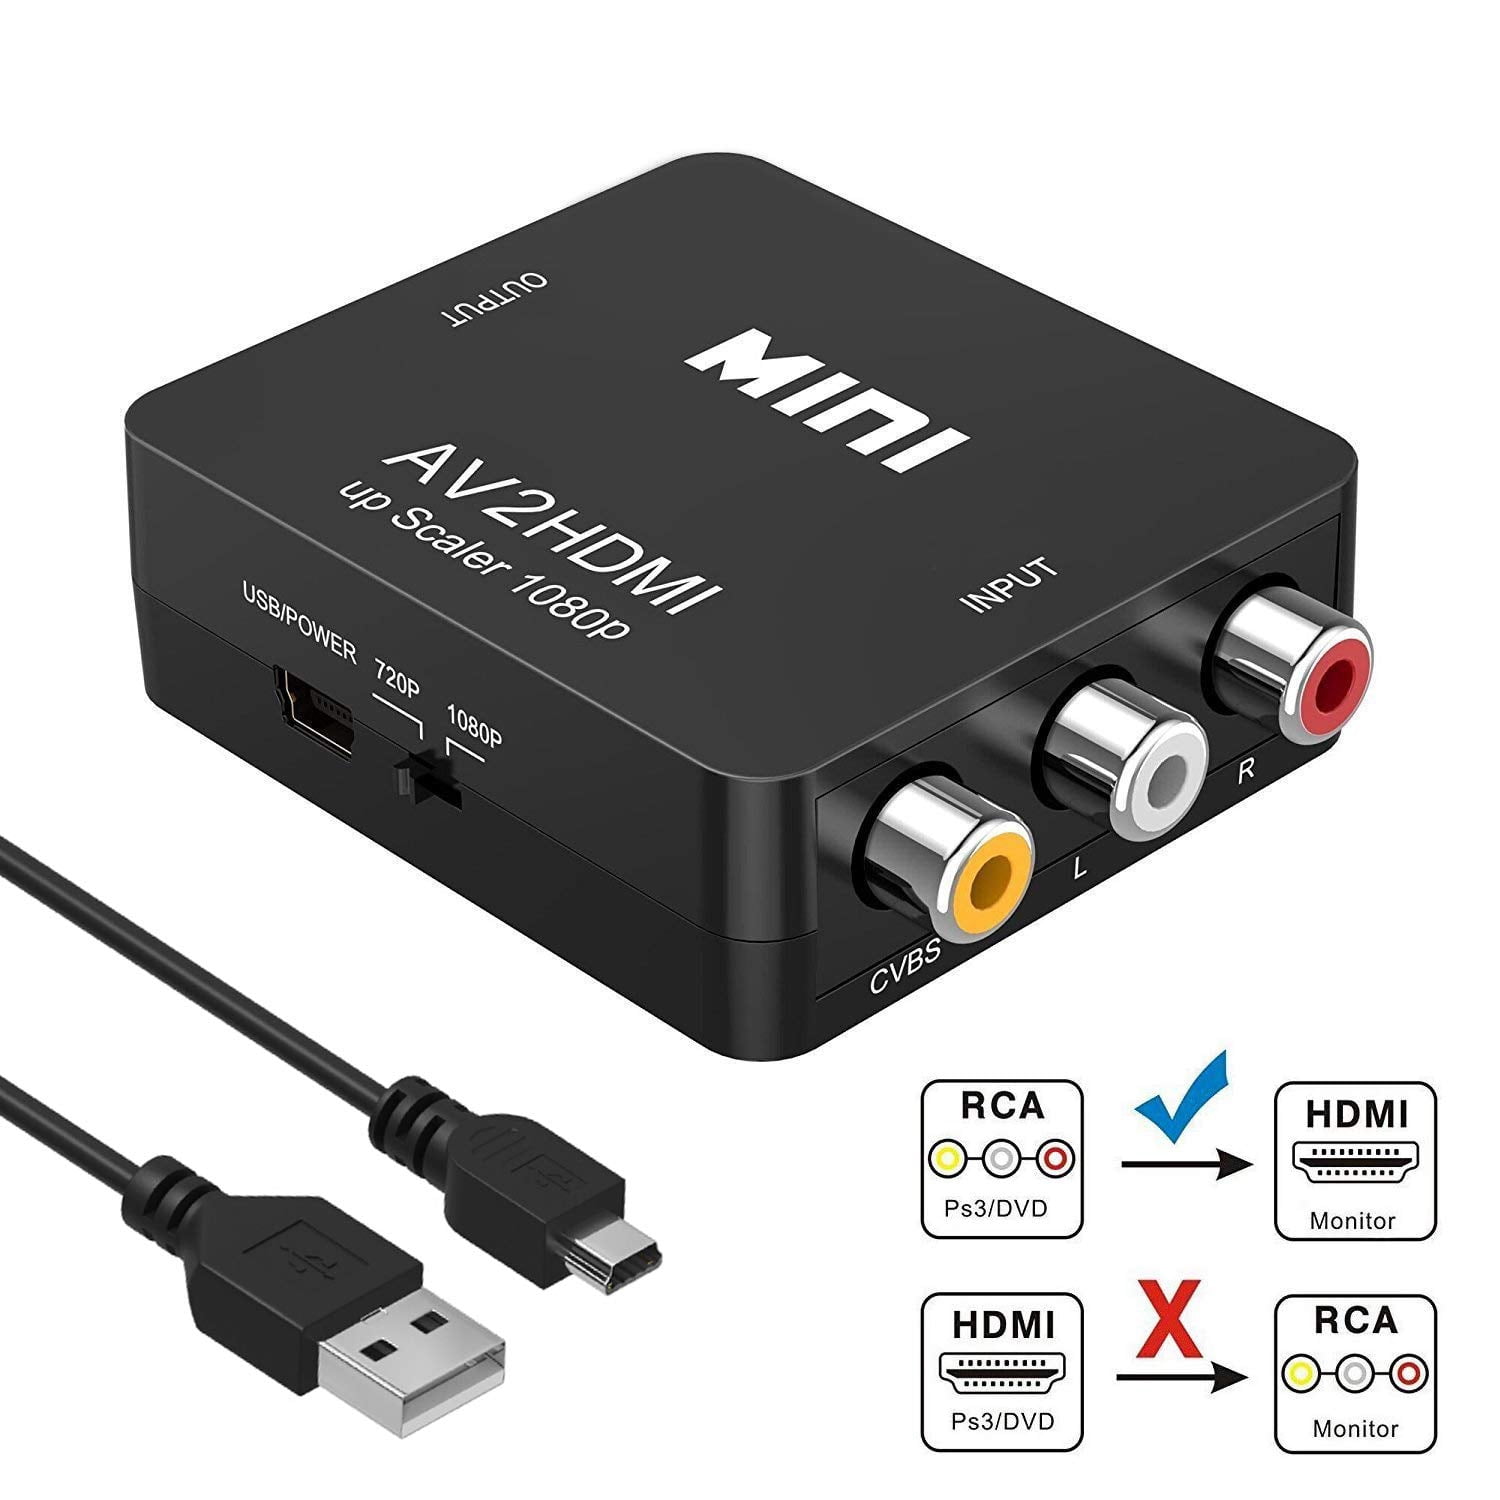 Flipper molen Ontslag nemen RCA to HDMI, Coolmade 1080P Mini RCA Composite CVBS AV to HDMI Video Audio Converter  Adapter Supporting PAL/NTSC with USB Charge Cable for PC Laptop Xbox PS4  PS3 TV STB VHS VCR